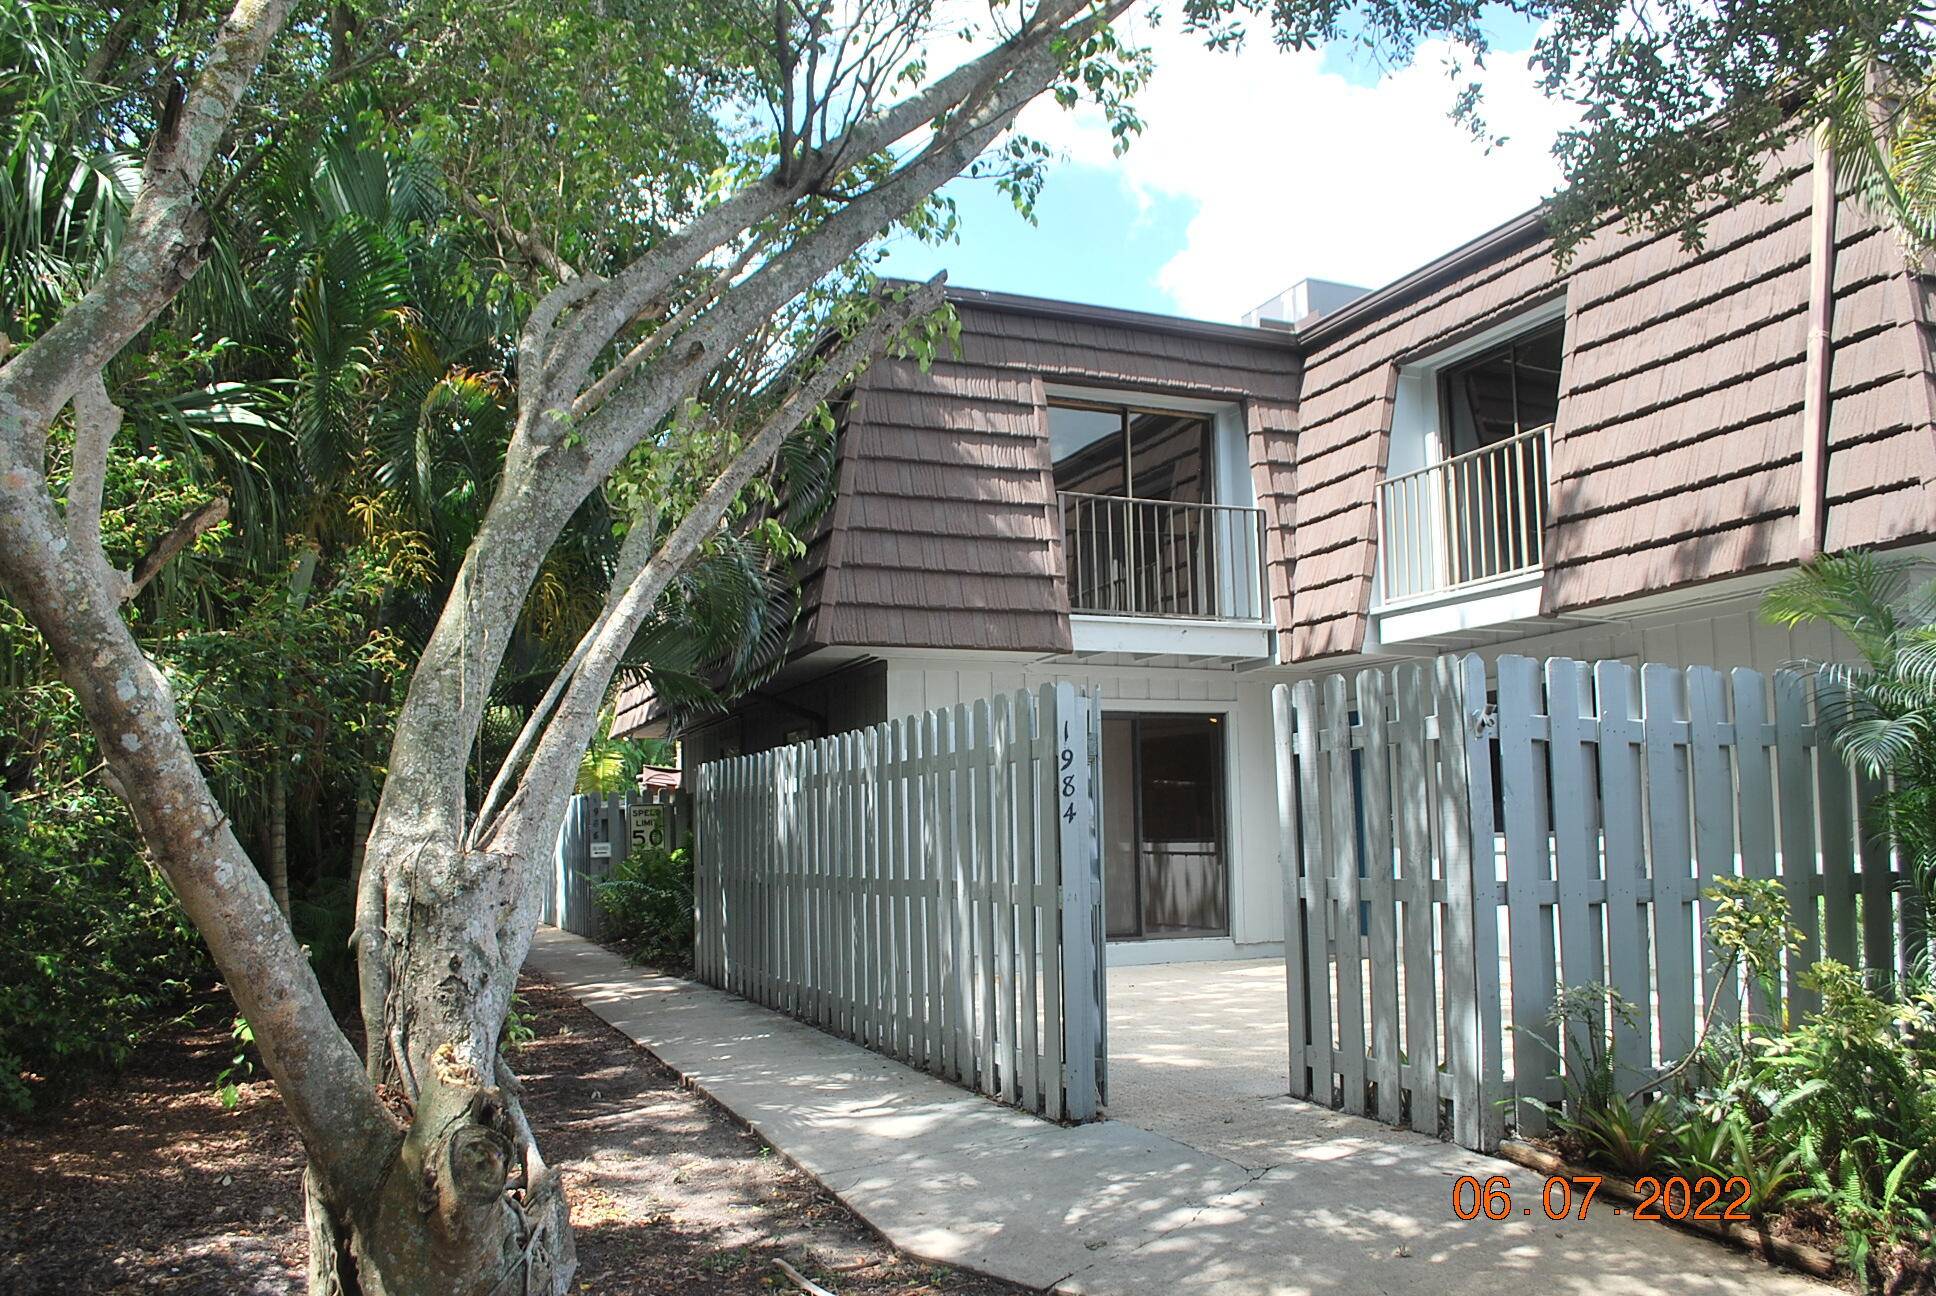 Townhouse in the heart of Jensen Beach with just minutes to the beach and downtown.